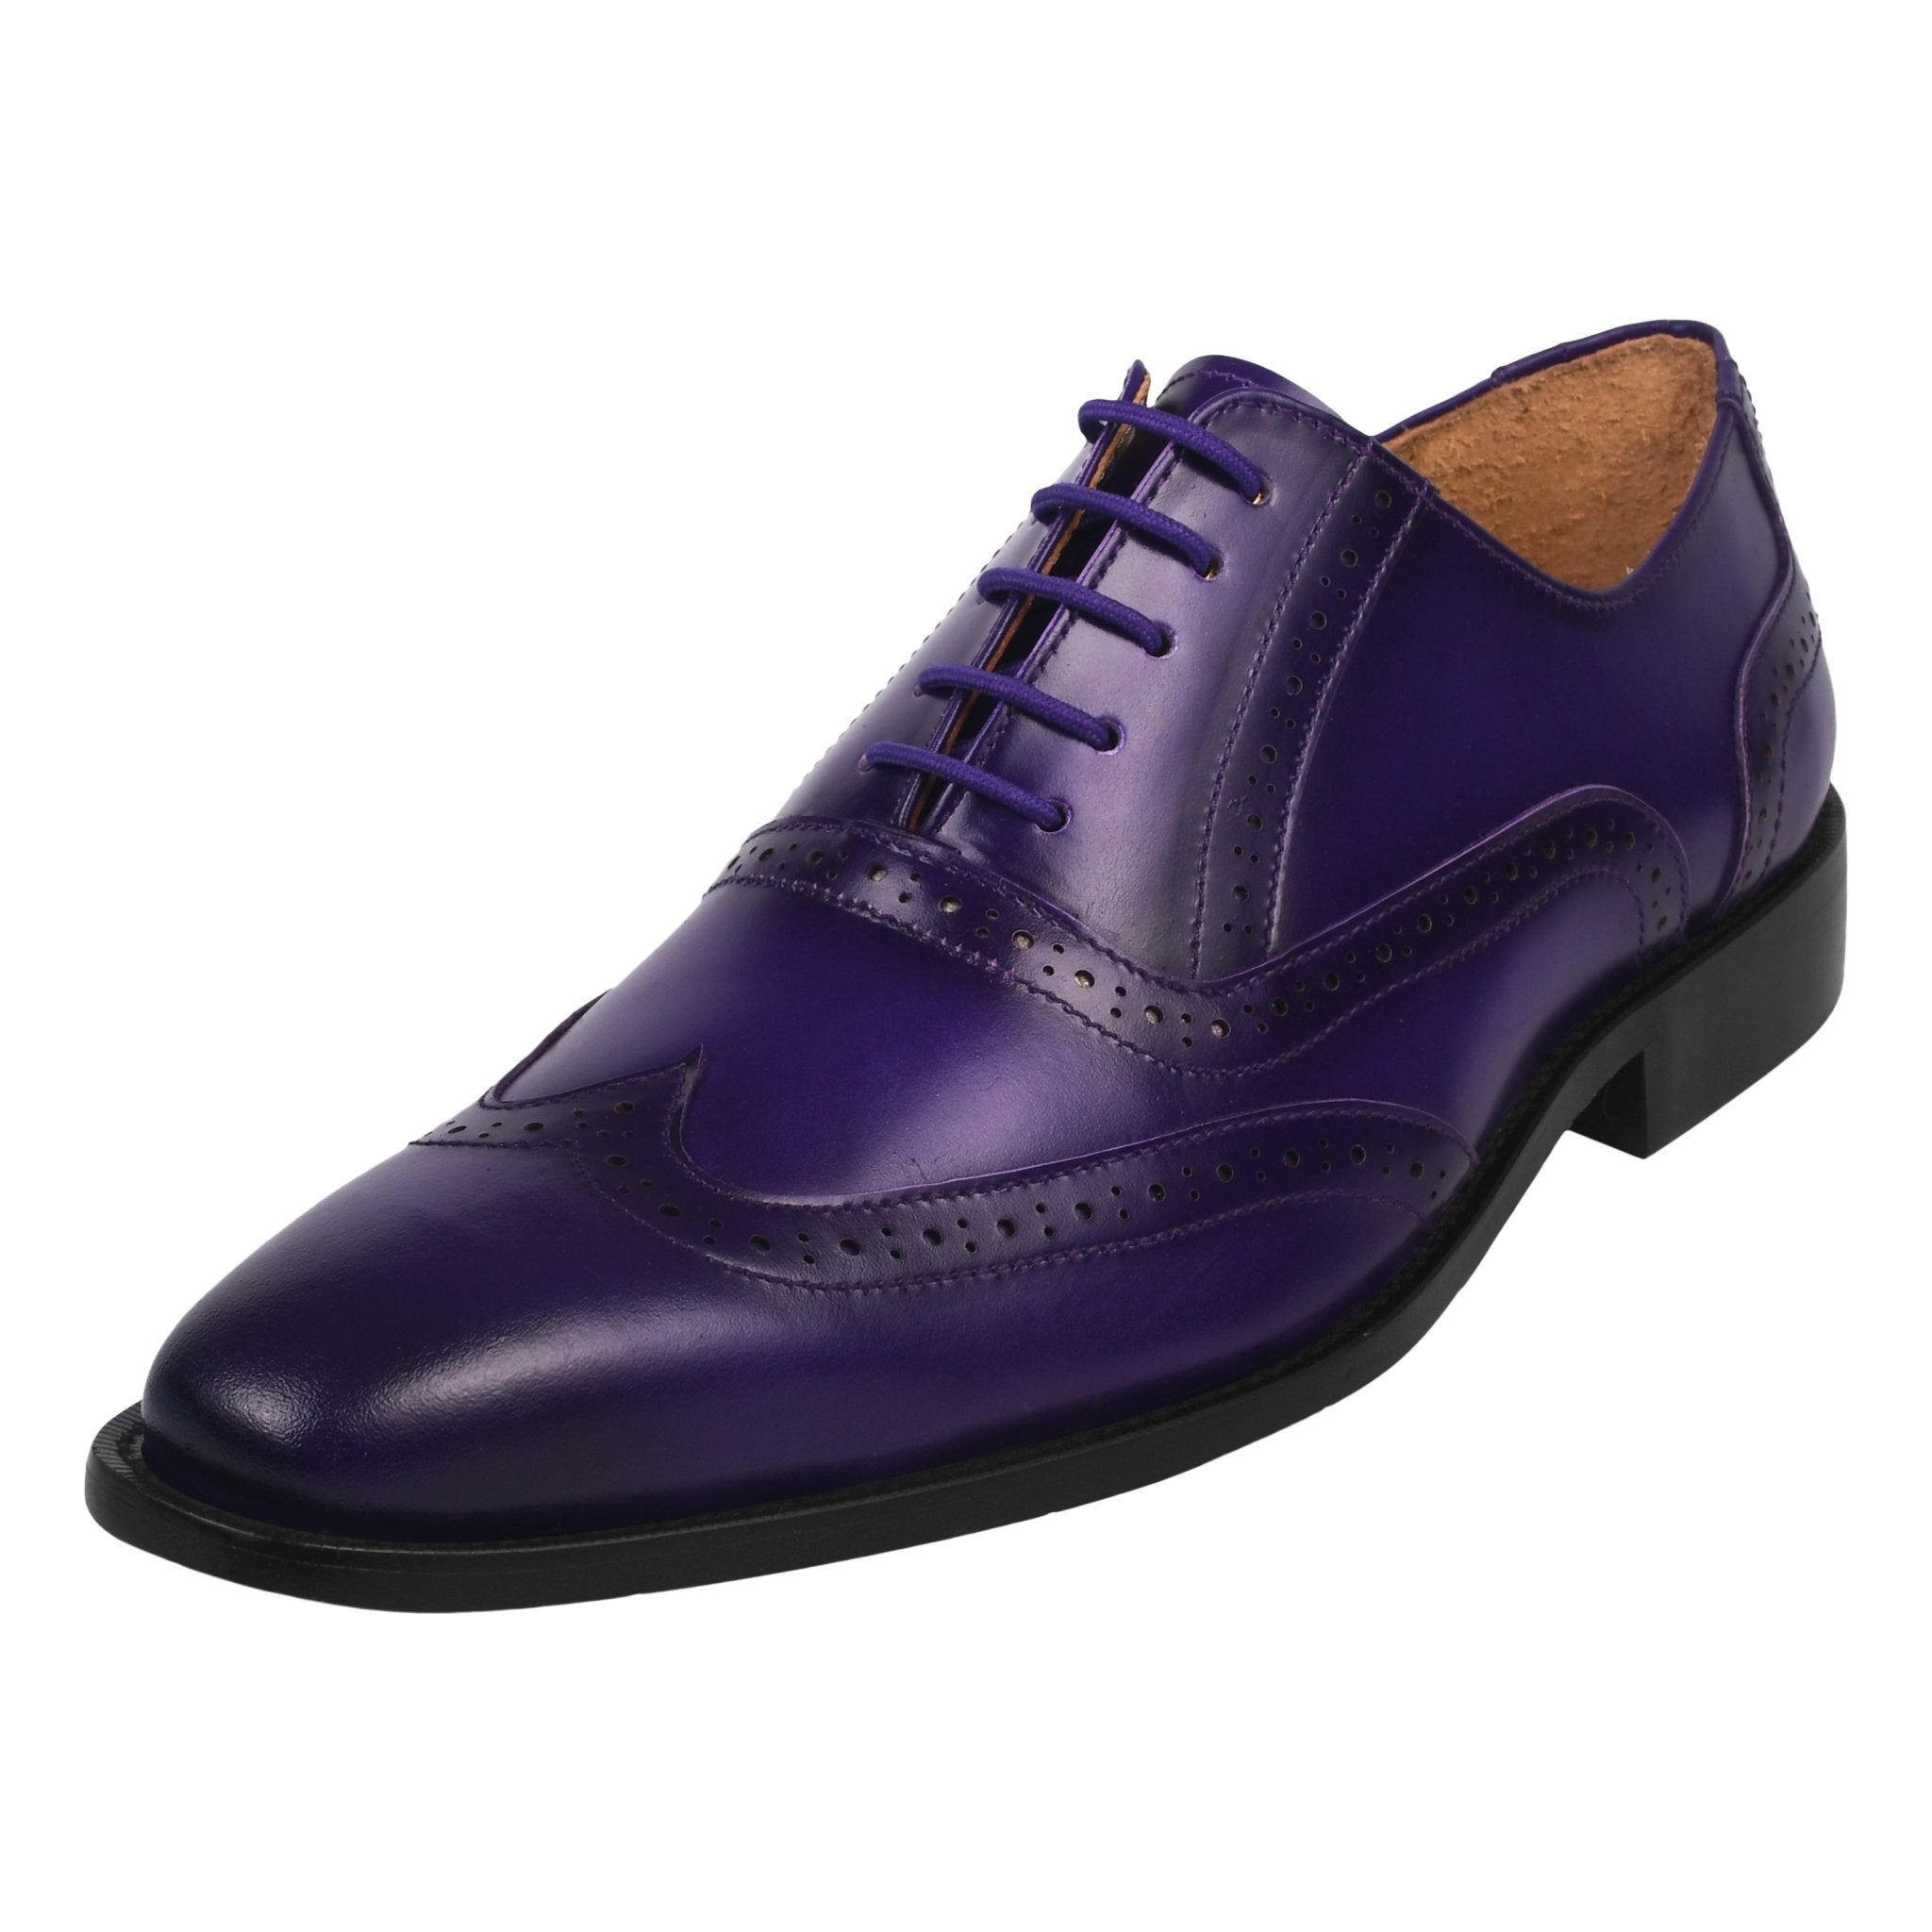 Sharon Genuine Leather Oxford Style Mens Dress Shoes